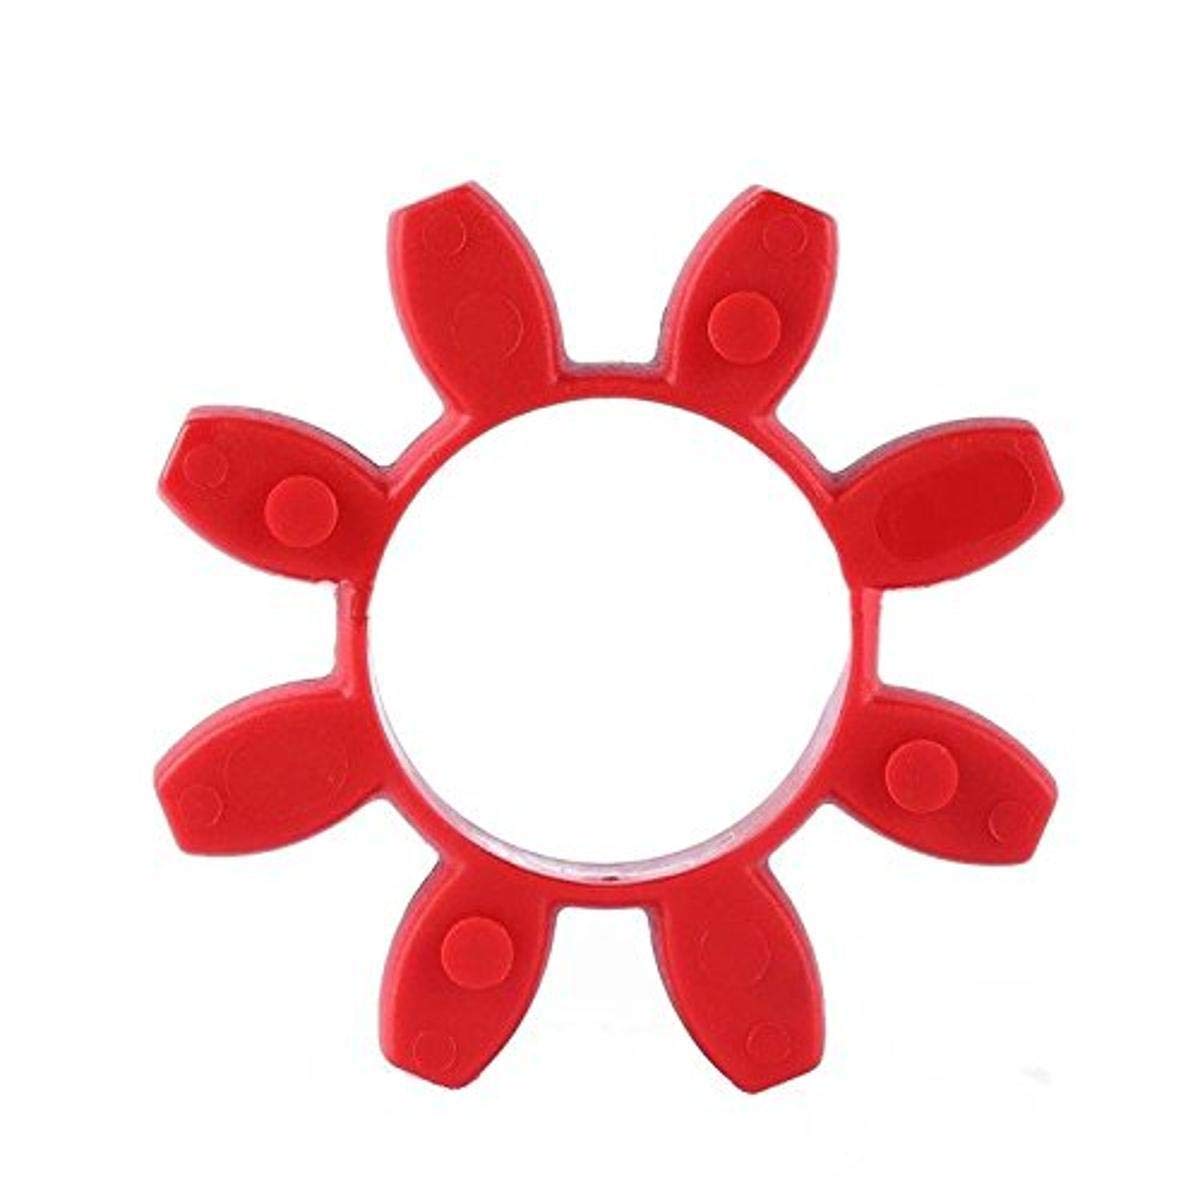 Spider, Red, 98 Shore A, Polyurethane, 2830 in-lbs Torque